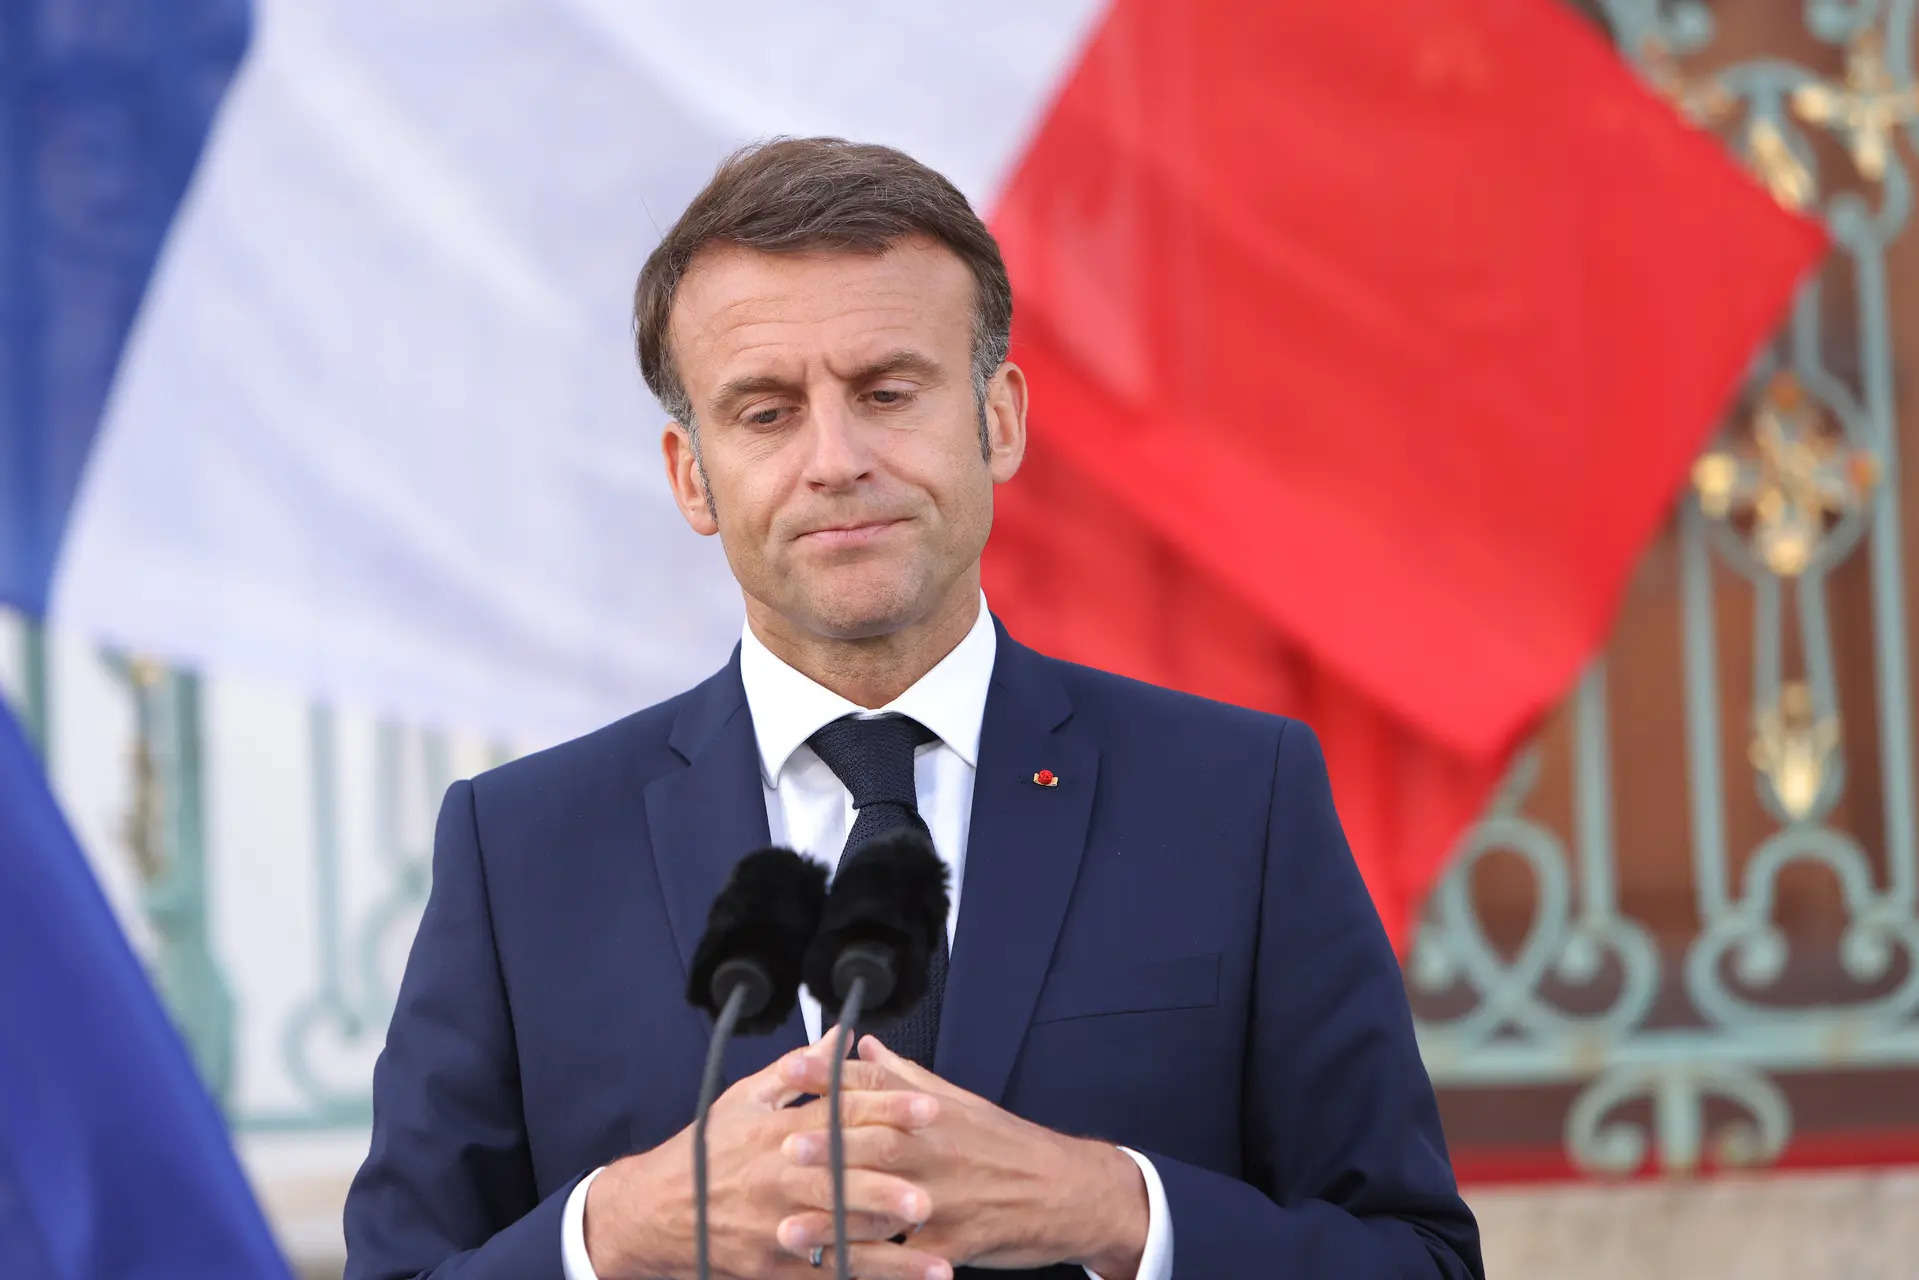 S&P downgrades French credit rating in blow to Macron 